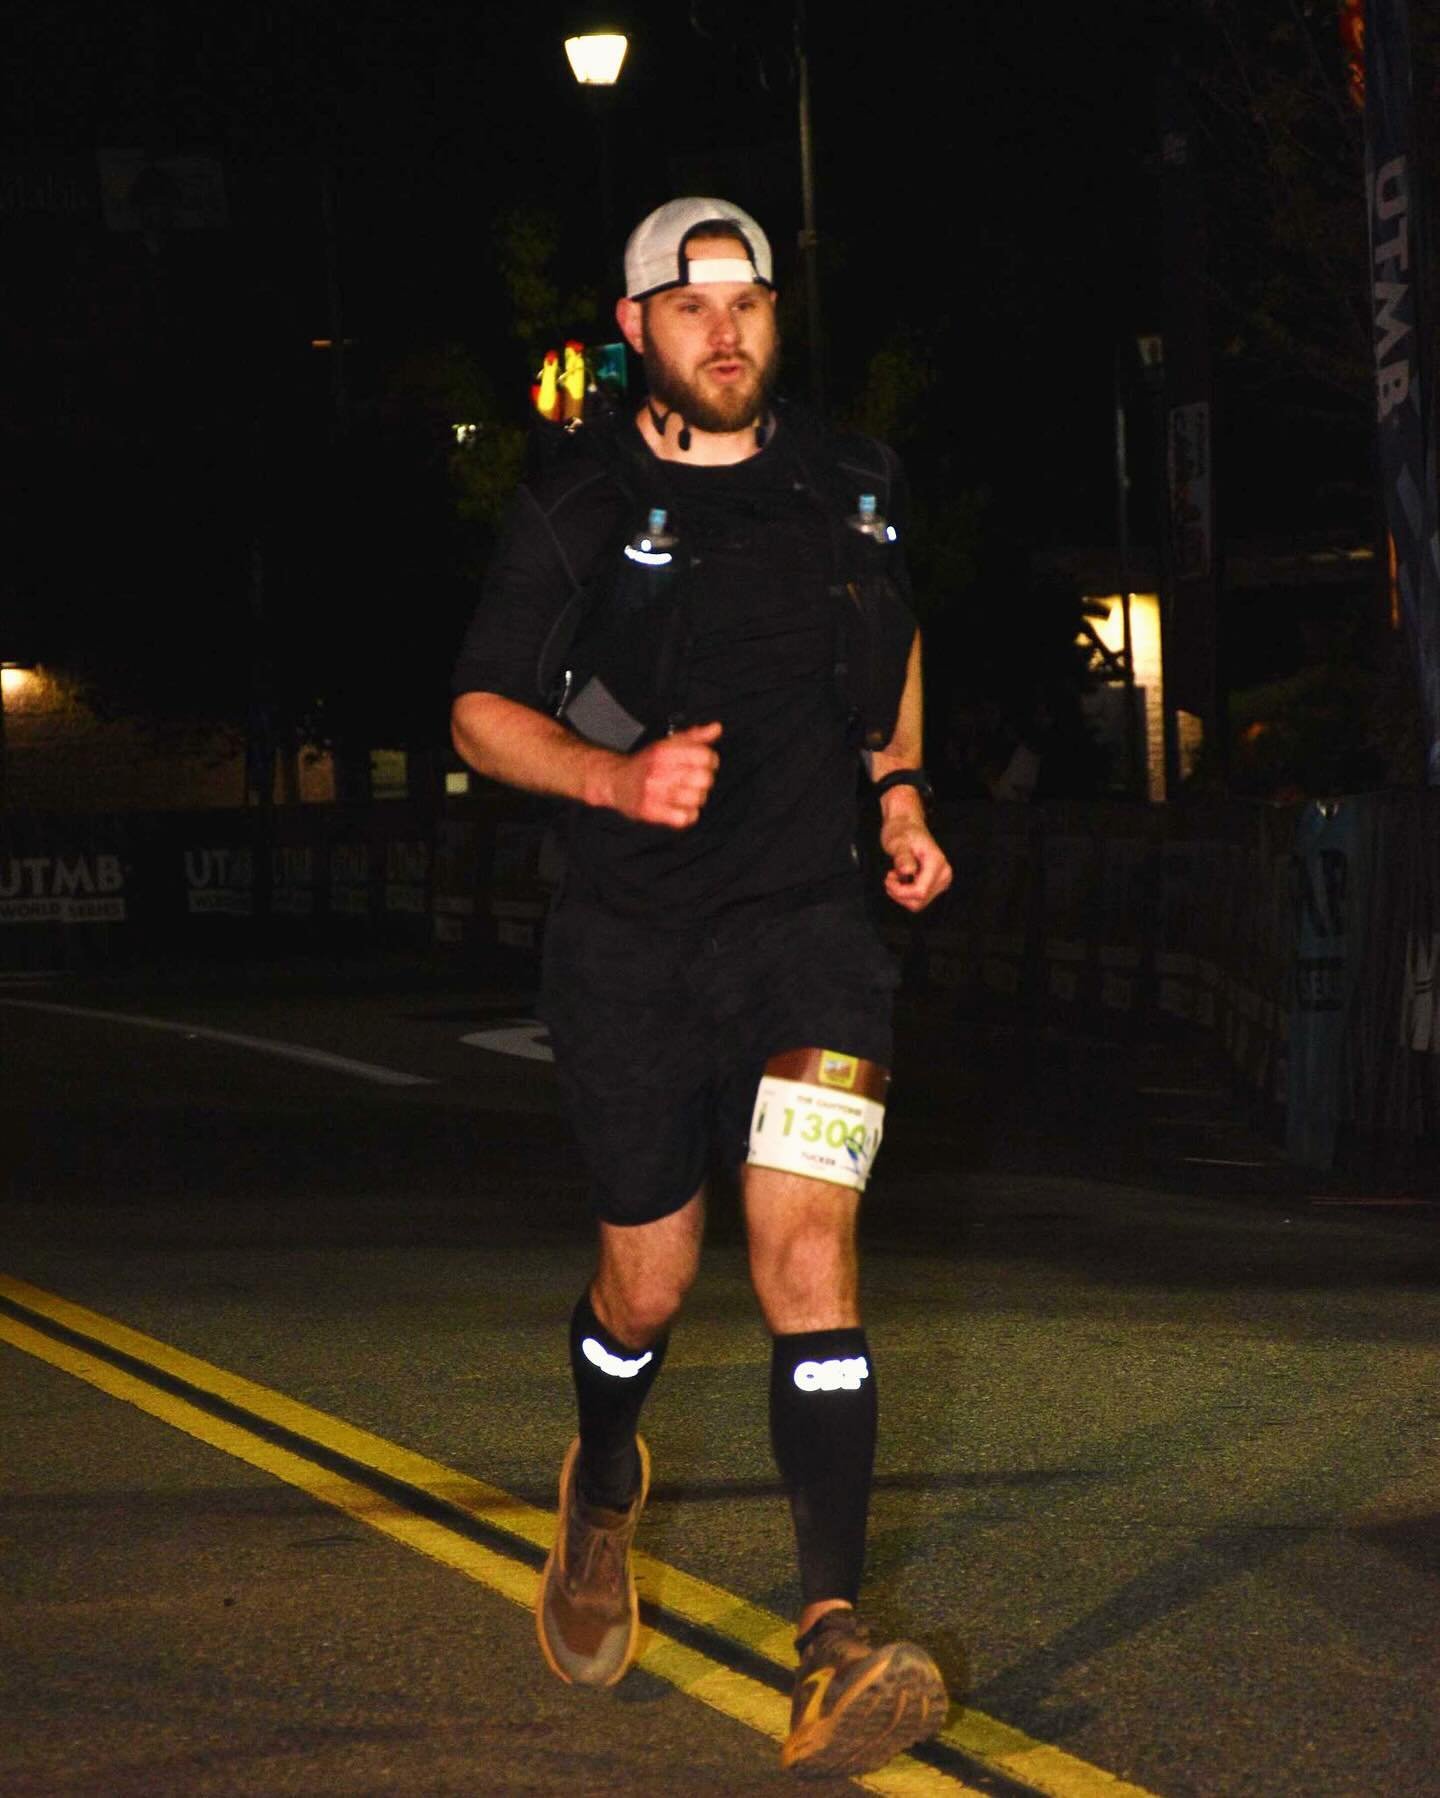 Canyons 100K: Congrats to Tucker Glenn for taking on this tough course that follows much of the Western States 100 course. He battled through the hills, the heat and some world-class blisters. 👊💪🙌

@glennsane 
#cantstopendurance #running #run901 #